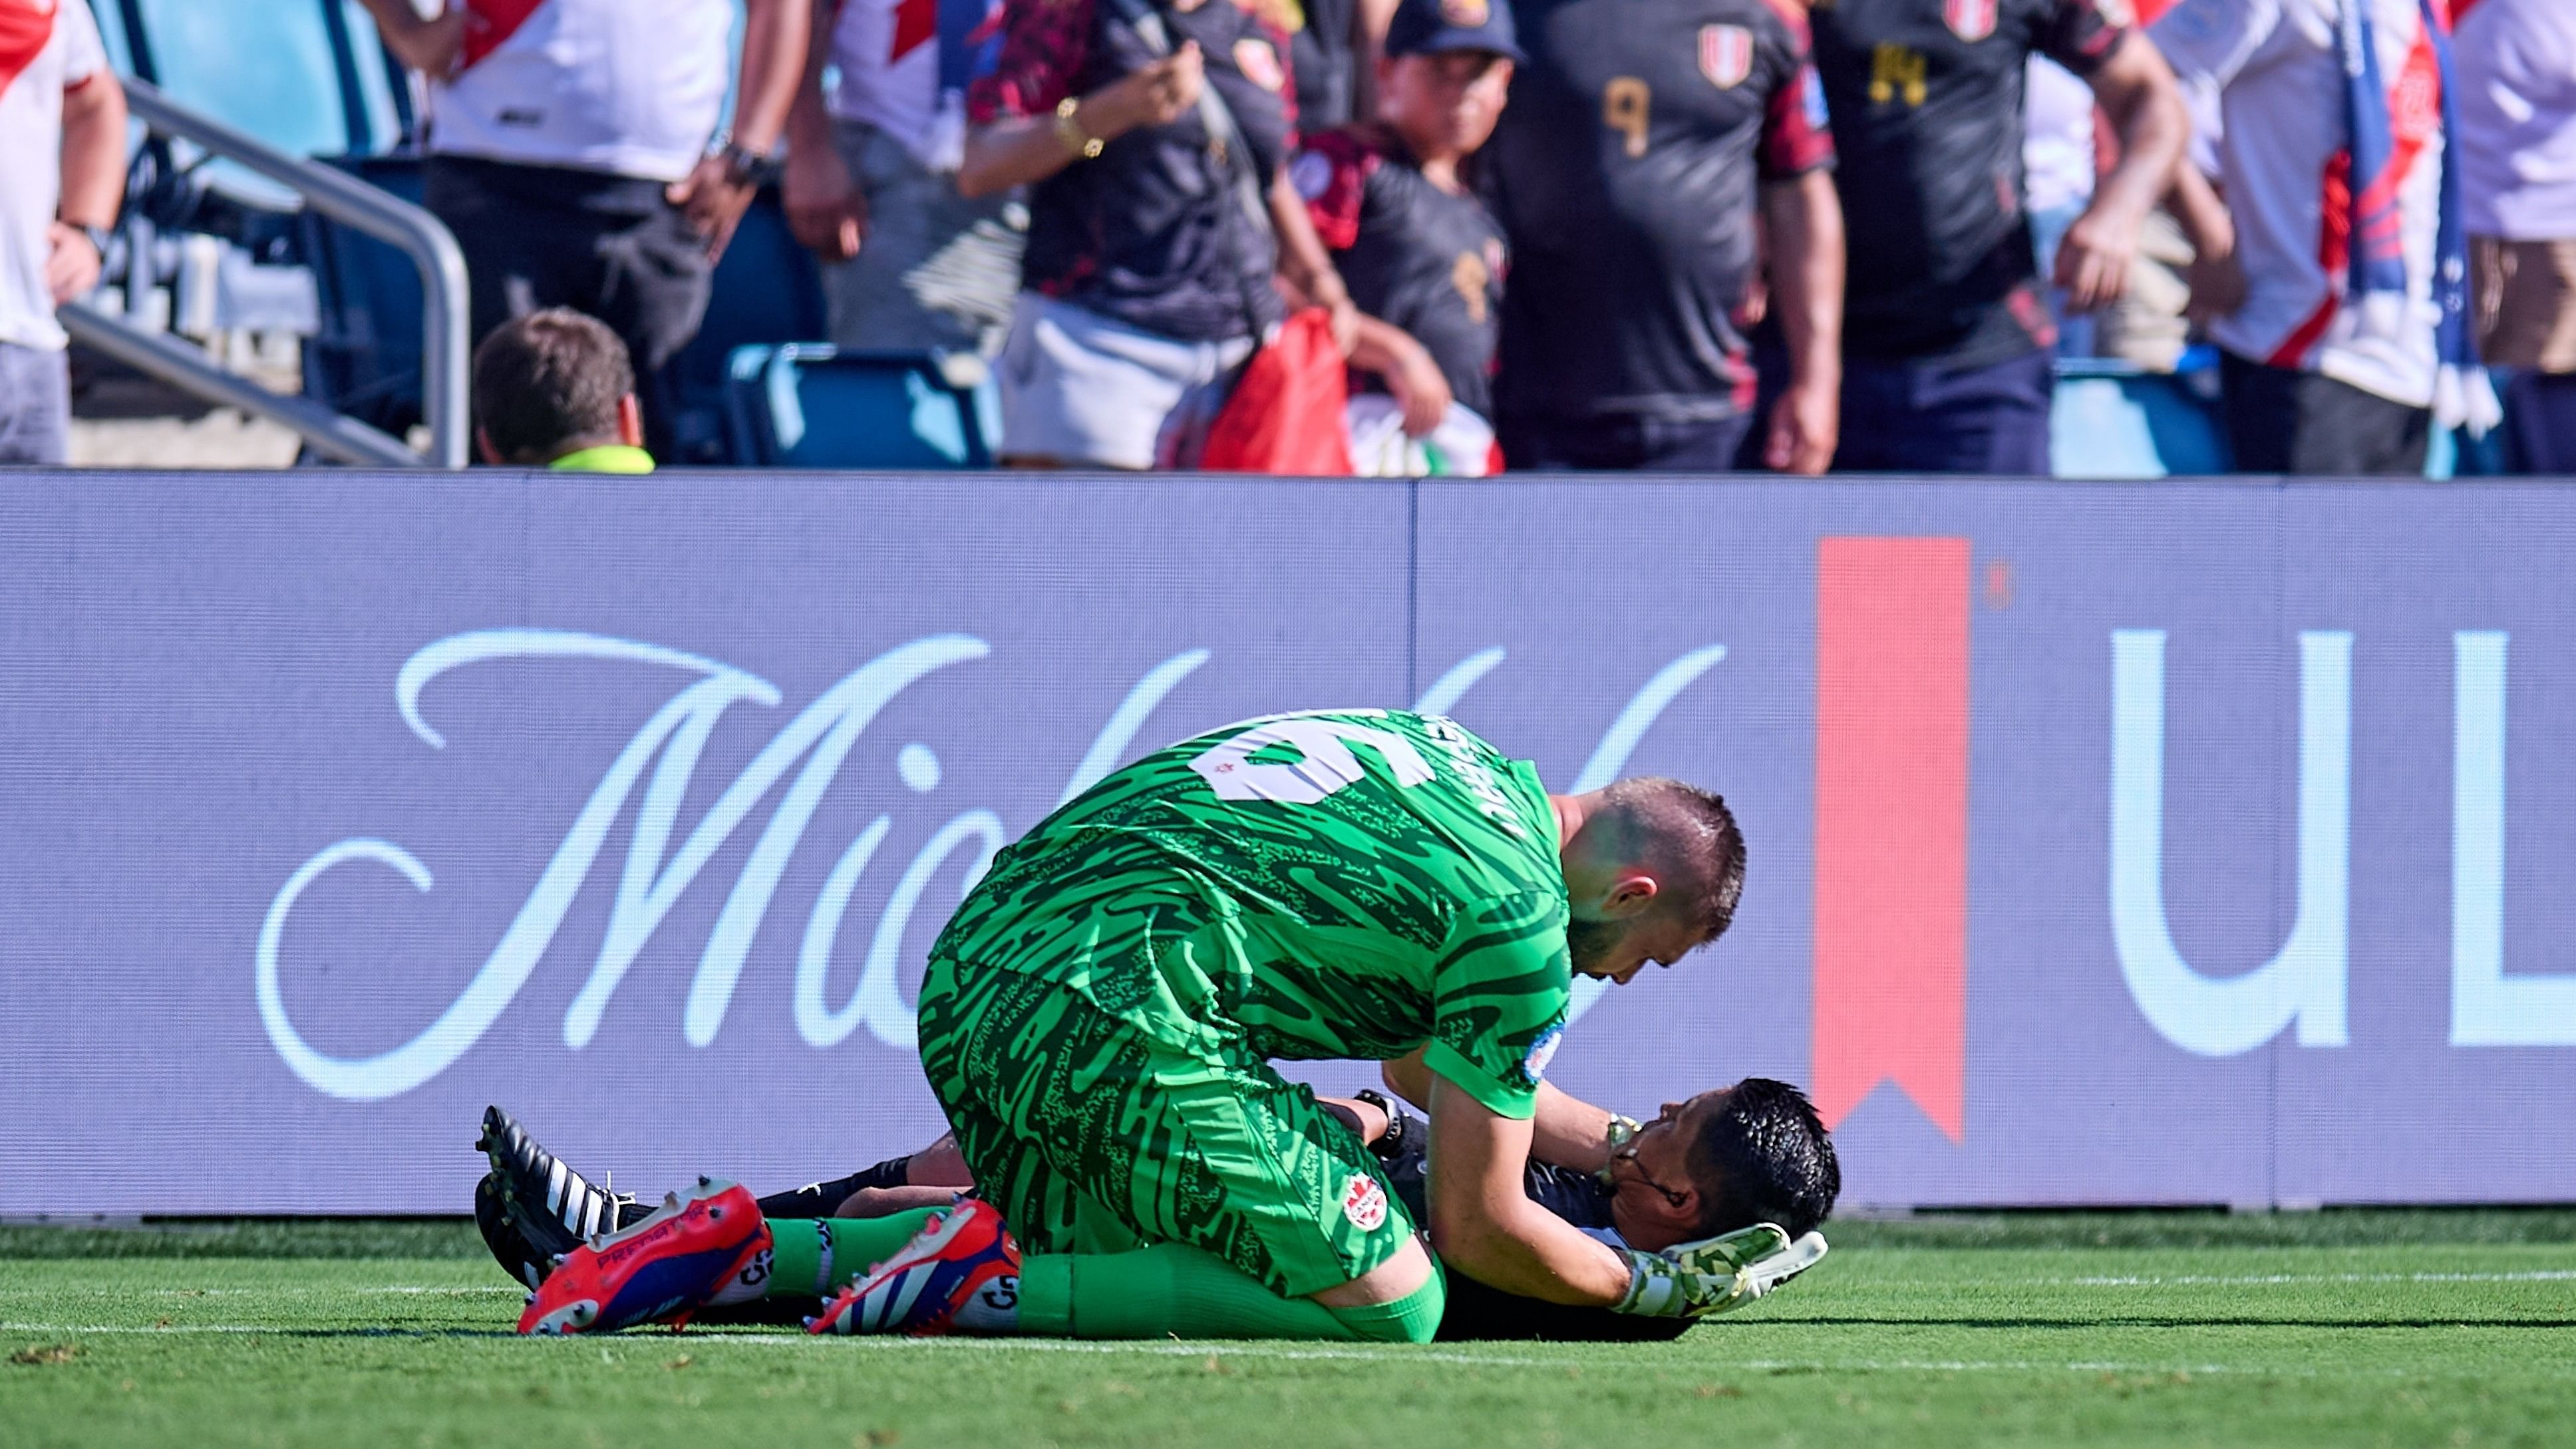 <div class="paragraphs"><p>Canada goalkeeper Maxime Crepeau attending Copa America assistant referee&nbsp;Humberto Panjoj after the later collapsed on the field&nbsp;during a Copa America match between Canada and Peru.</p></div>